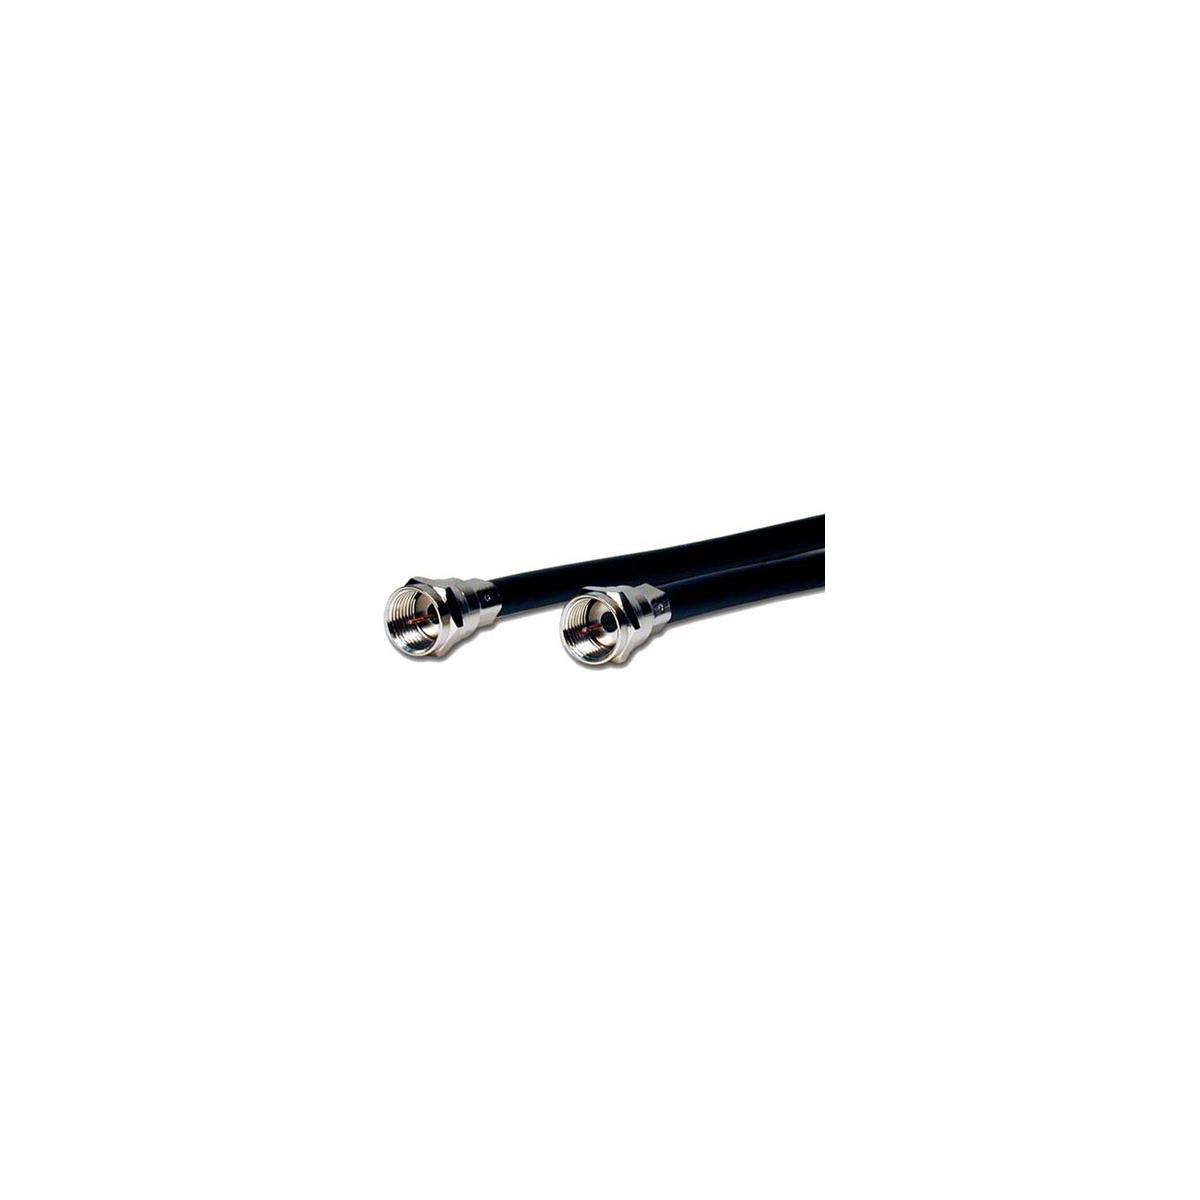 Image of Comprehensive 10' Standard Series RF Coax Video Cable